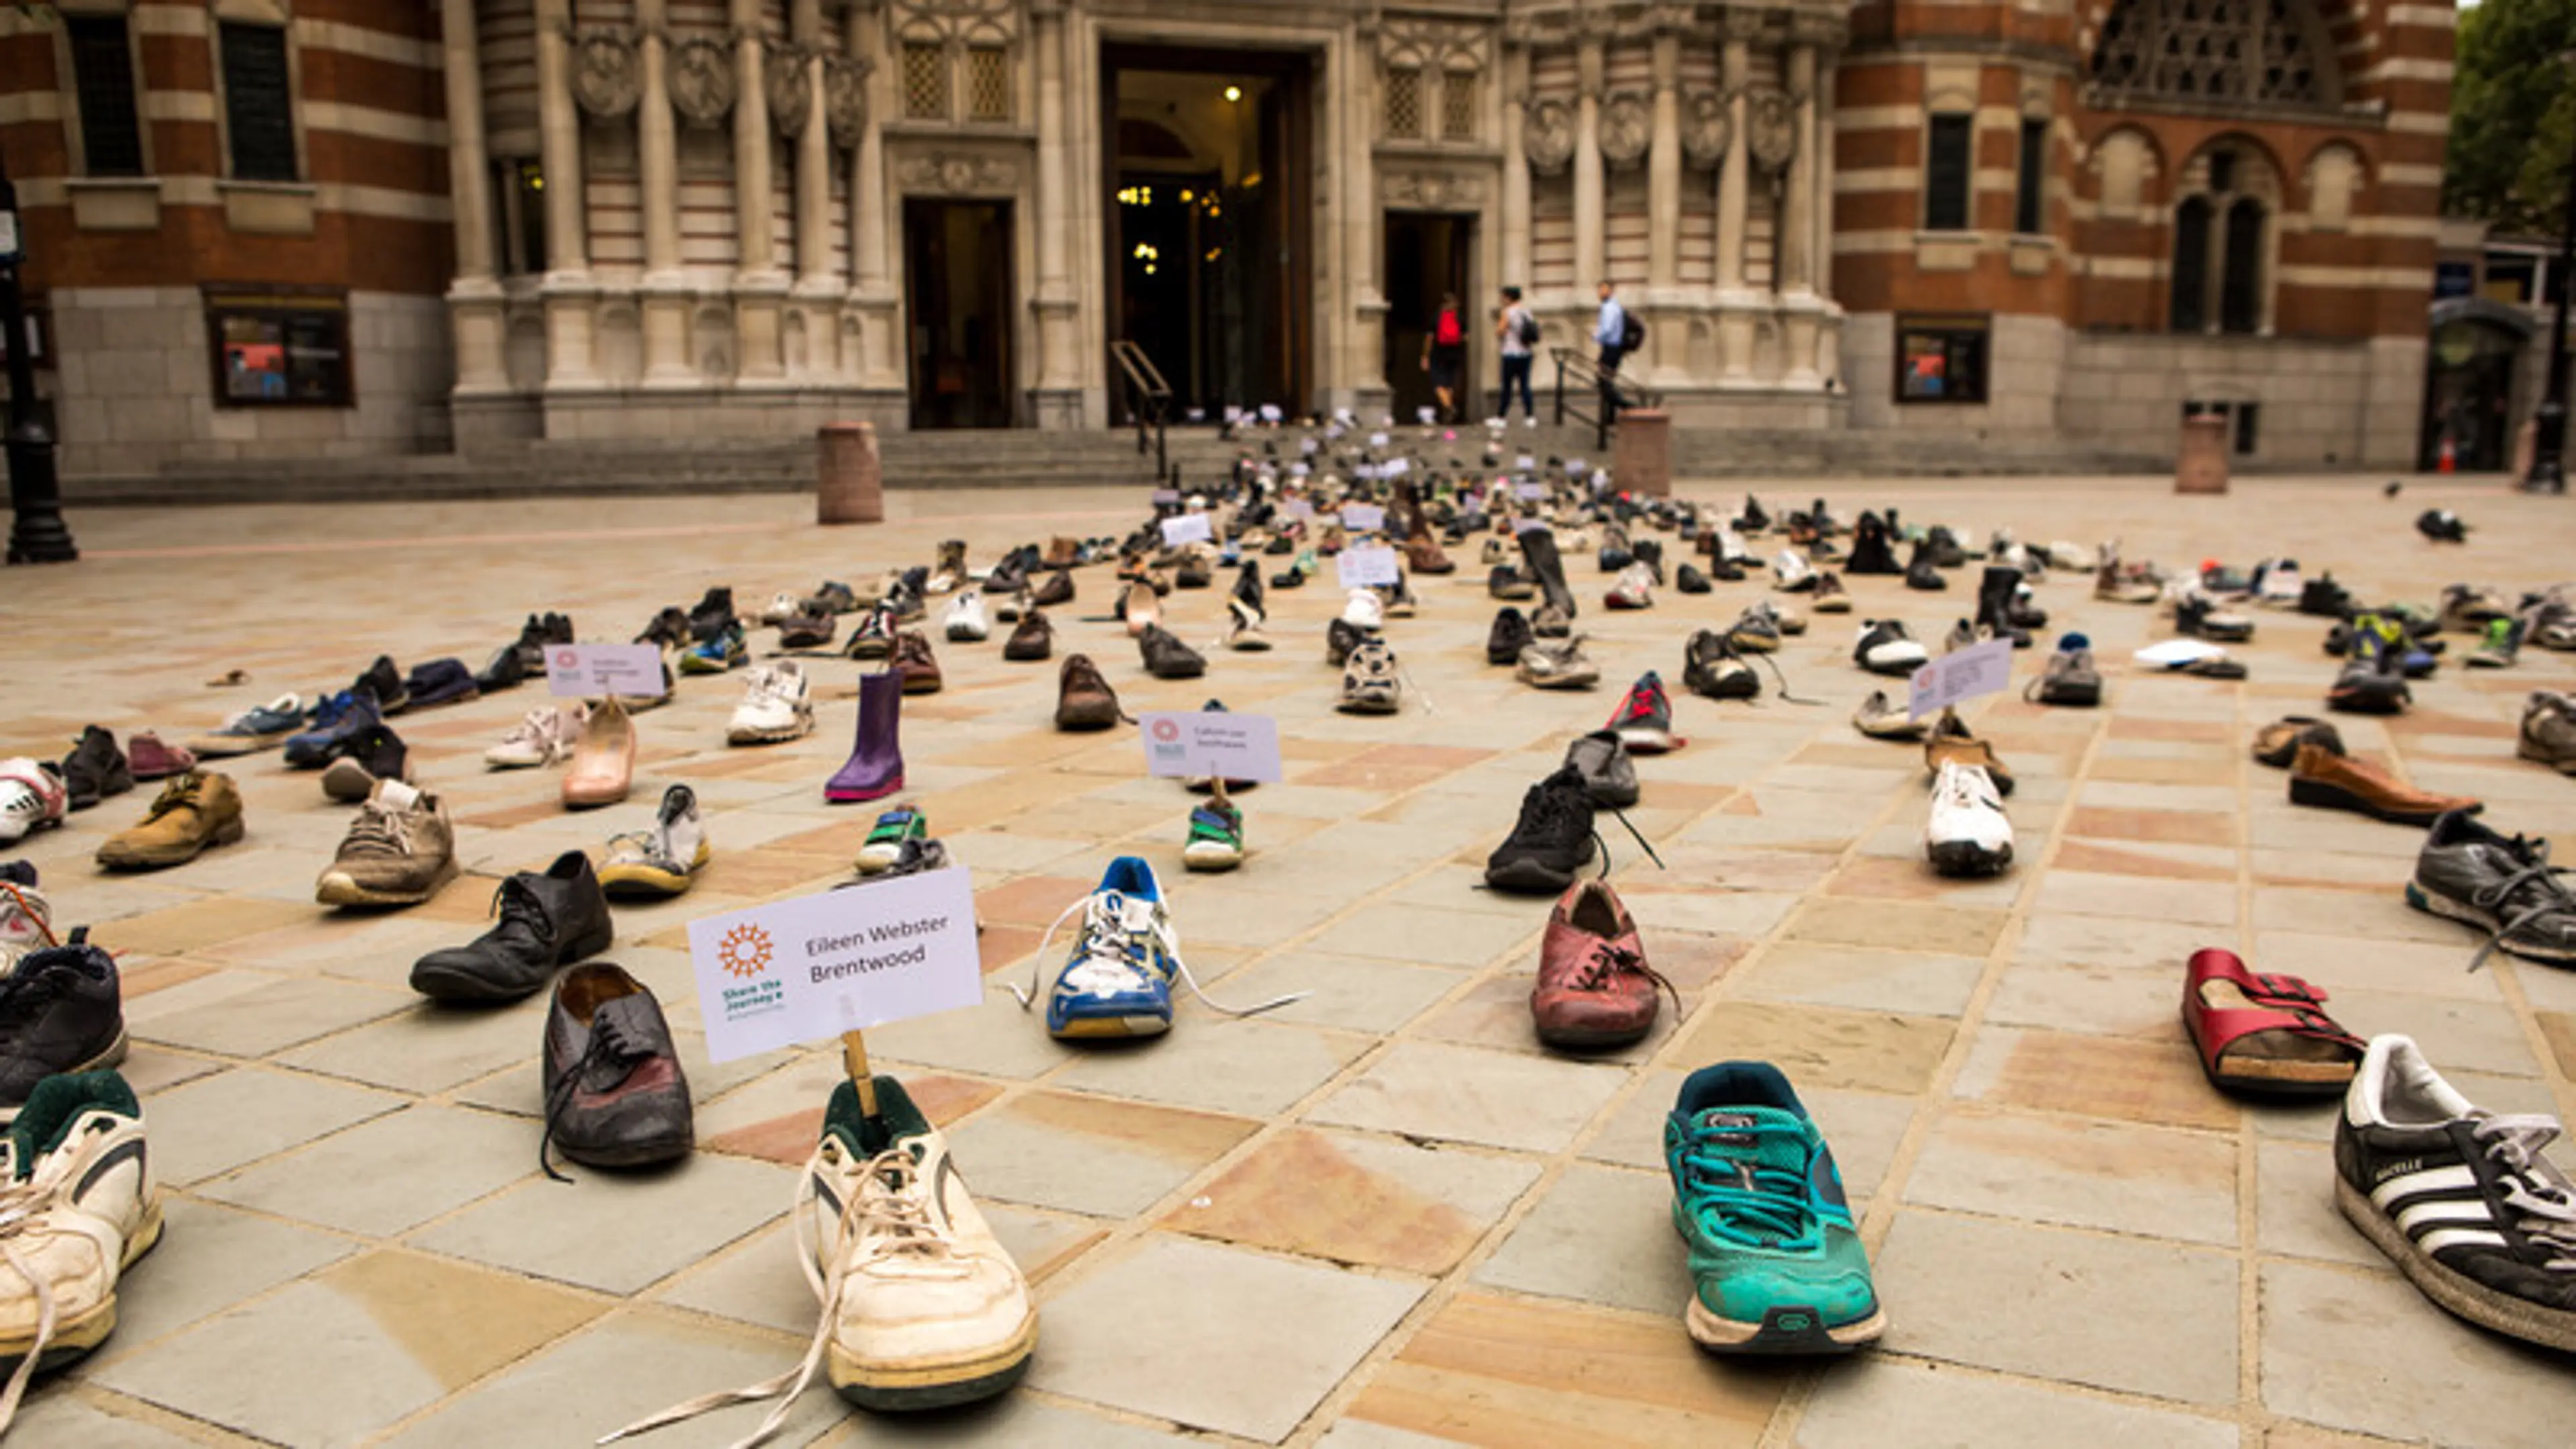 UK - Westminster - Shoes outside Westminster Cathedral for Share the Journey display